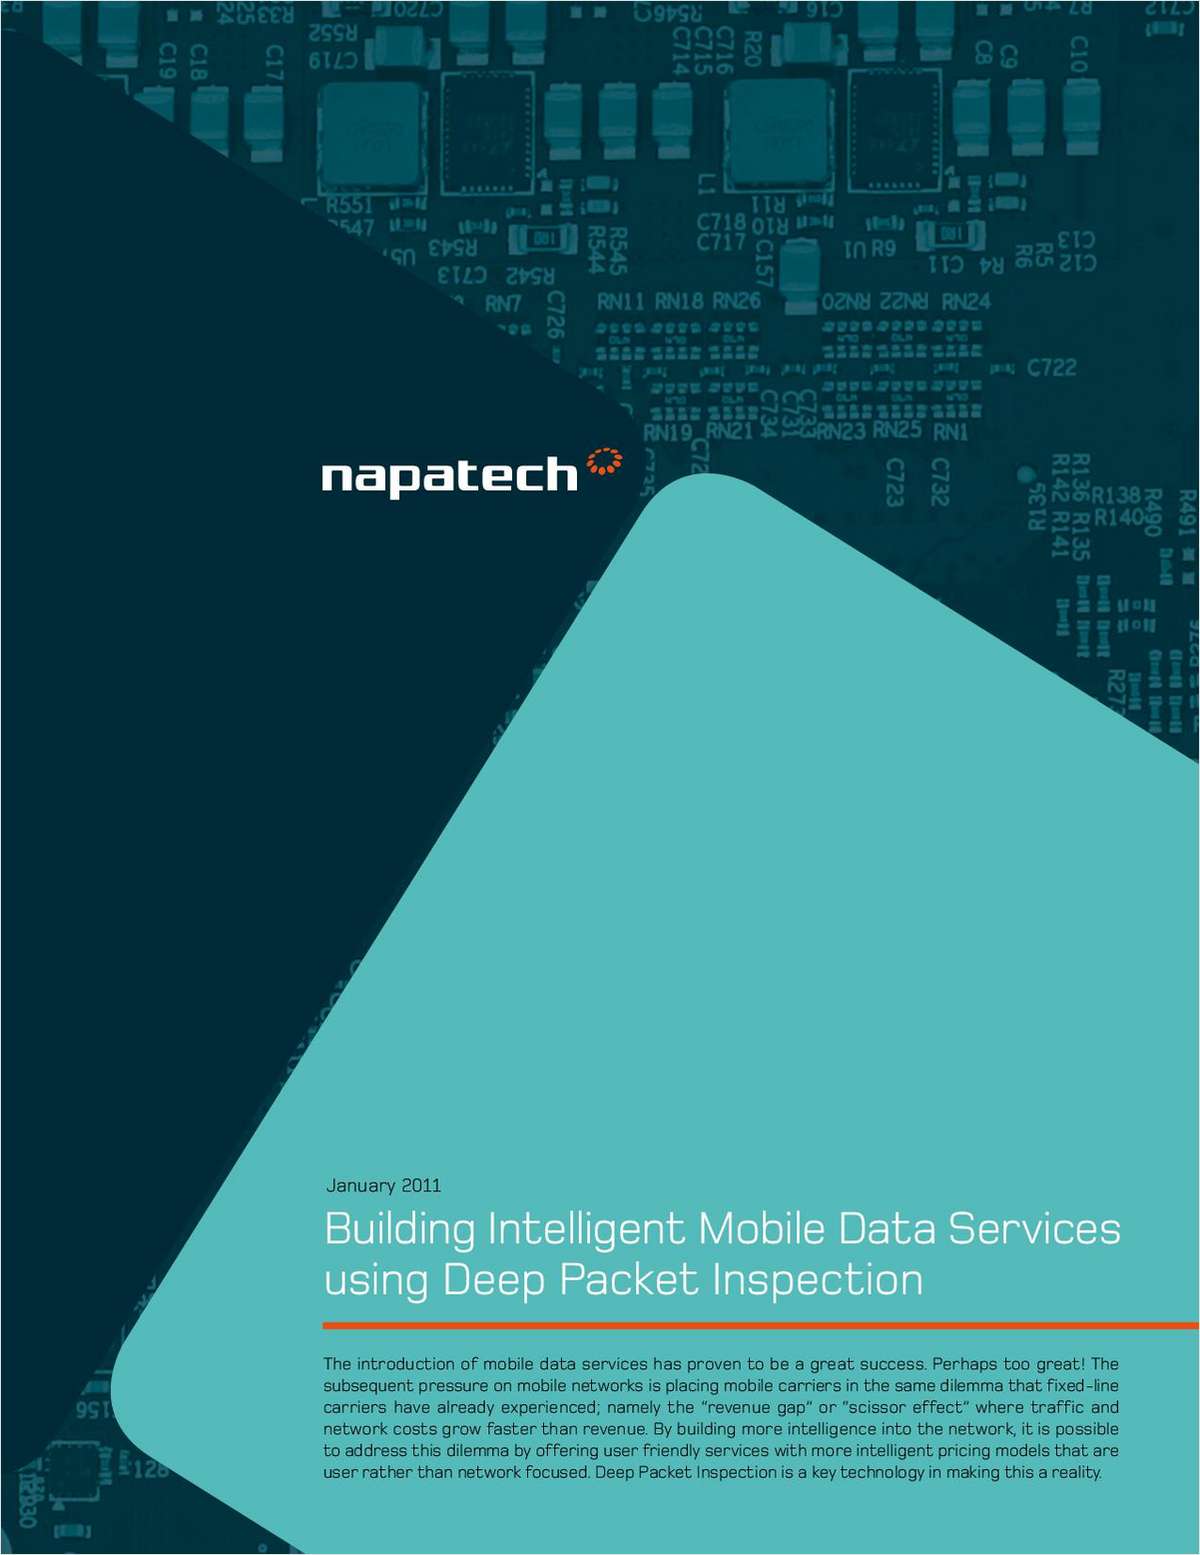 Building Intelligent Mobile Data Services Using Deep Packet Inspection for Telecom Equipment Vendors